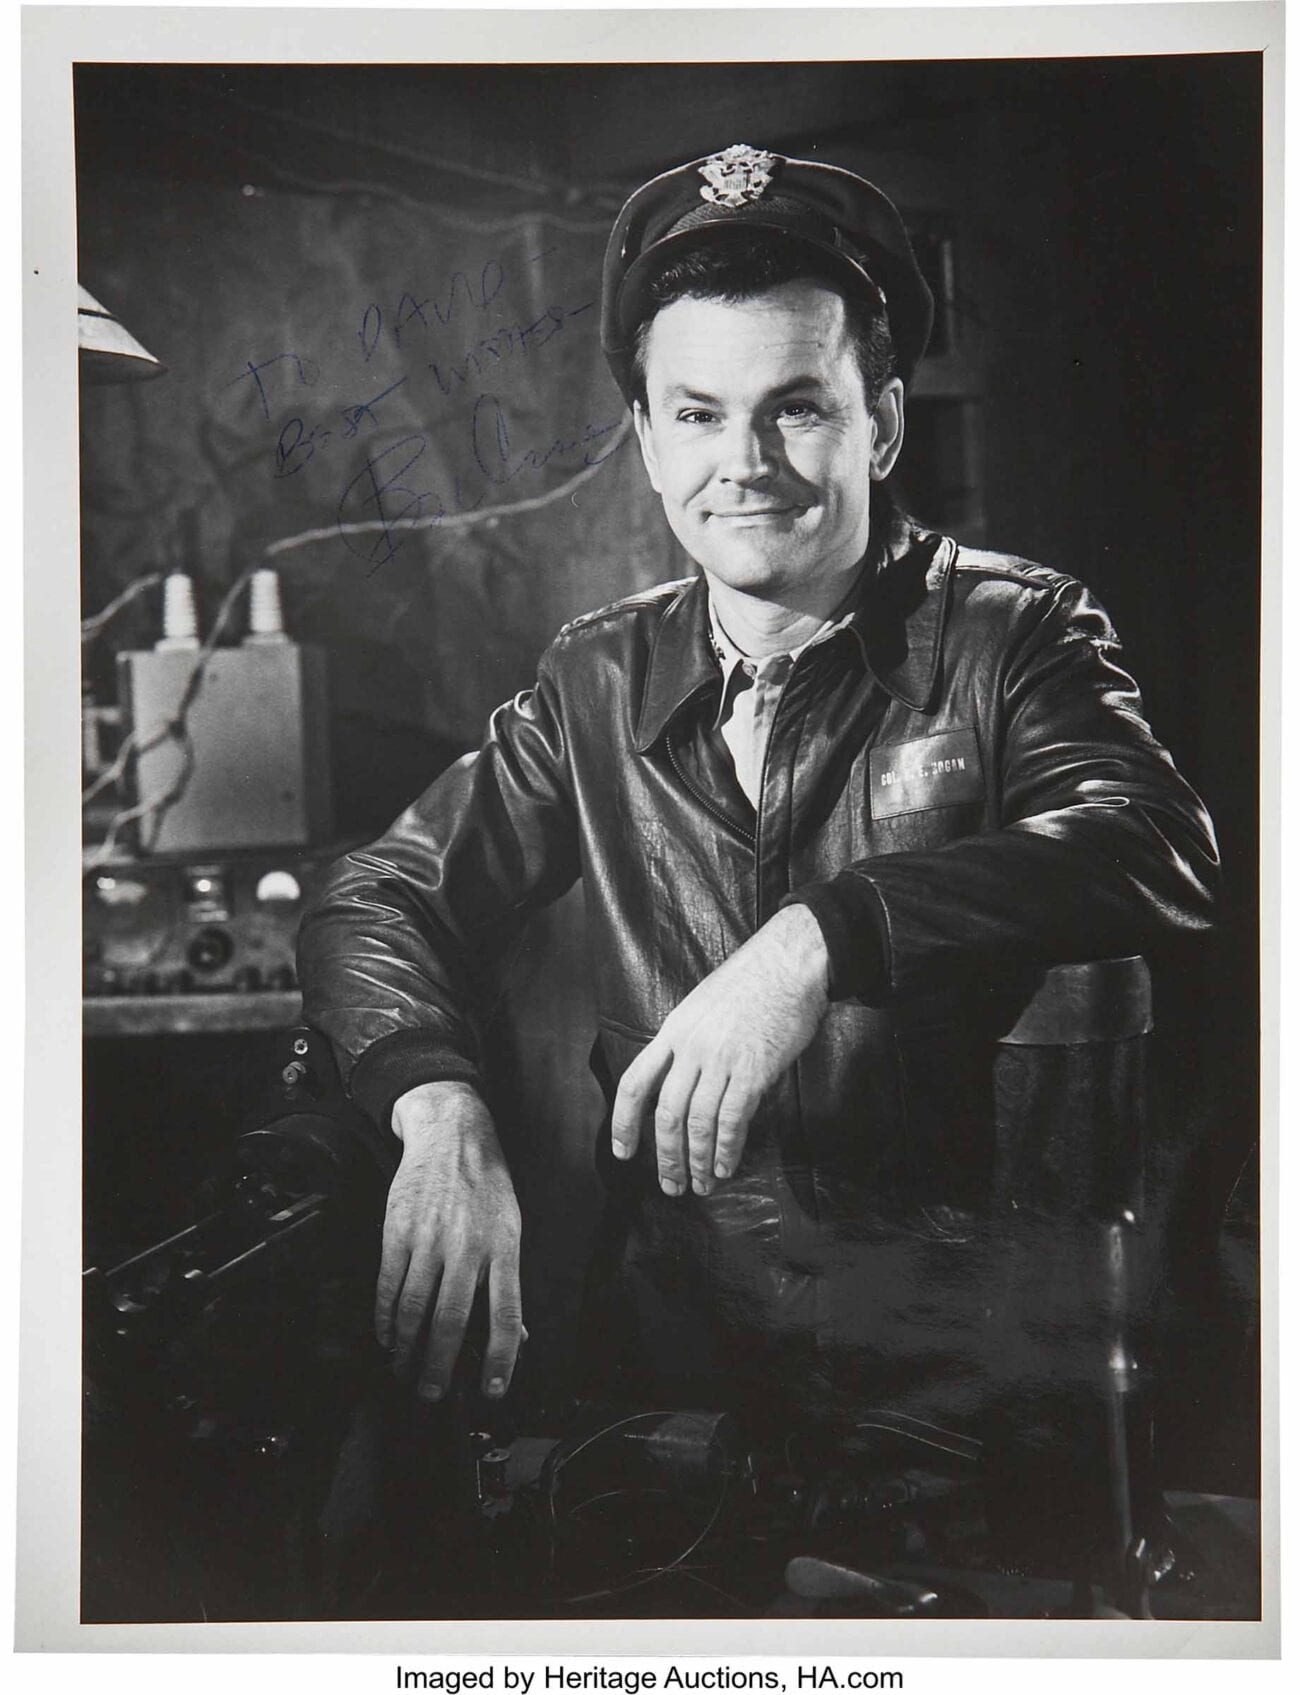 Bob Crane was a true American TV star with 'Hogan's Heroes'. But after his untimely demise, the truth about his private life came out in the open.